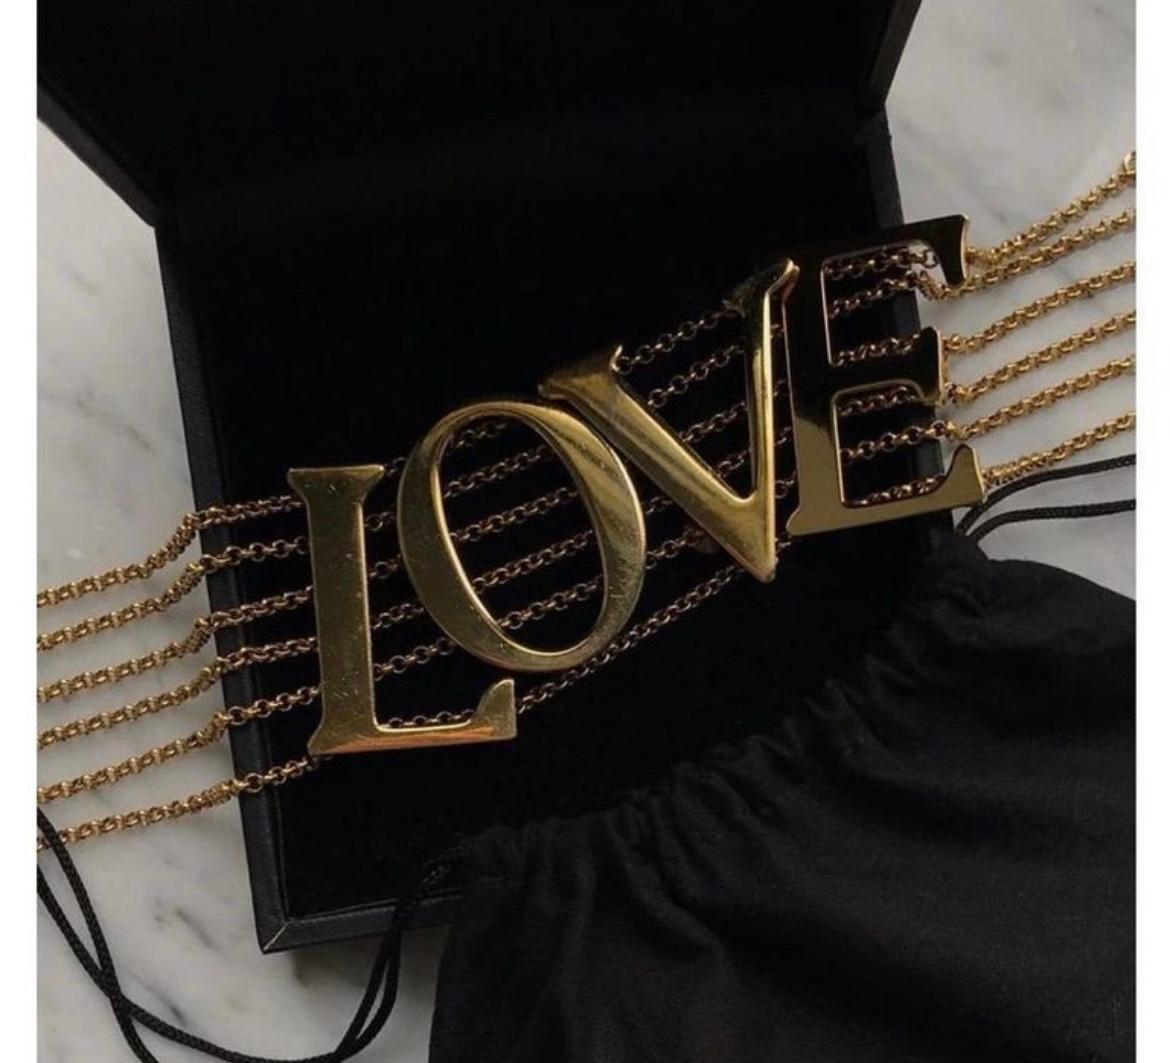 Women's Iconic 2003 Vintage Dolce & Gabbana LOVE Choker Necklace For Sale